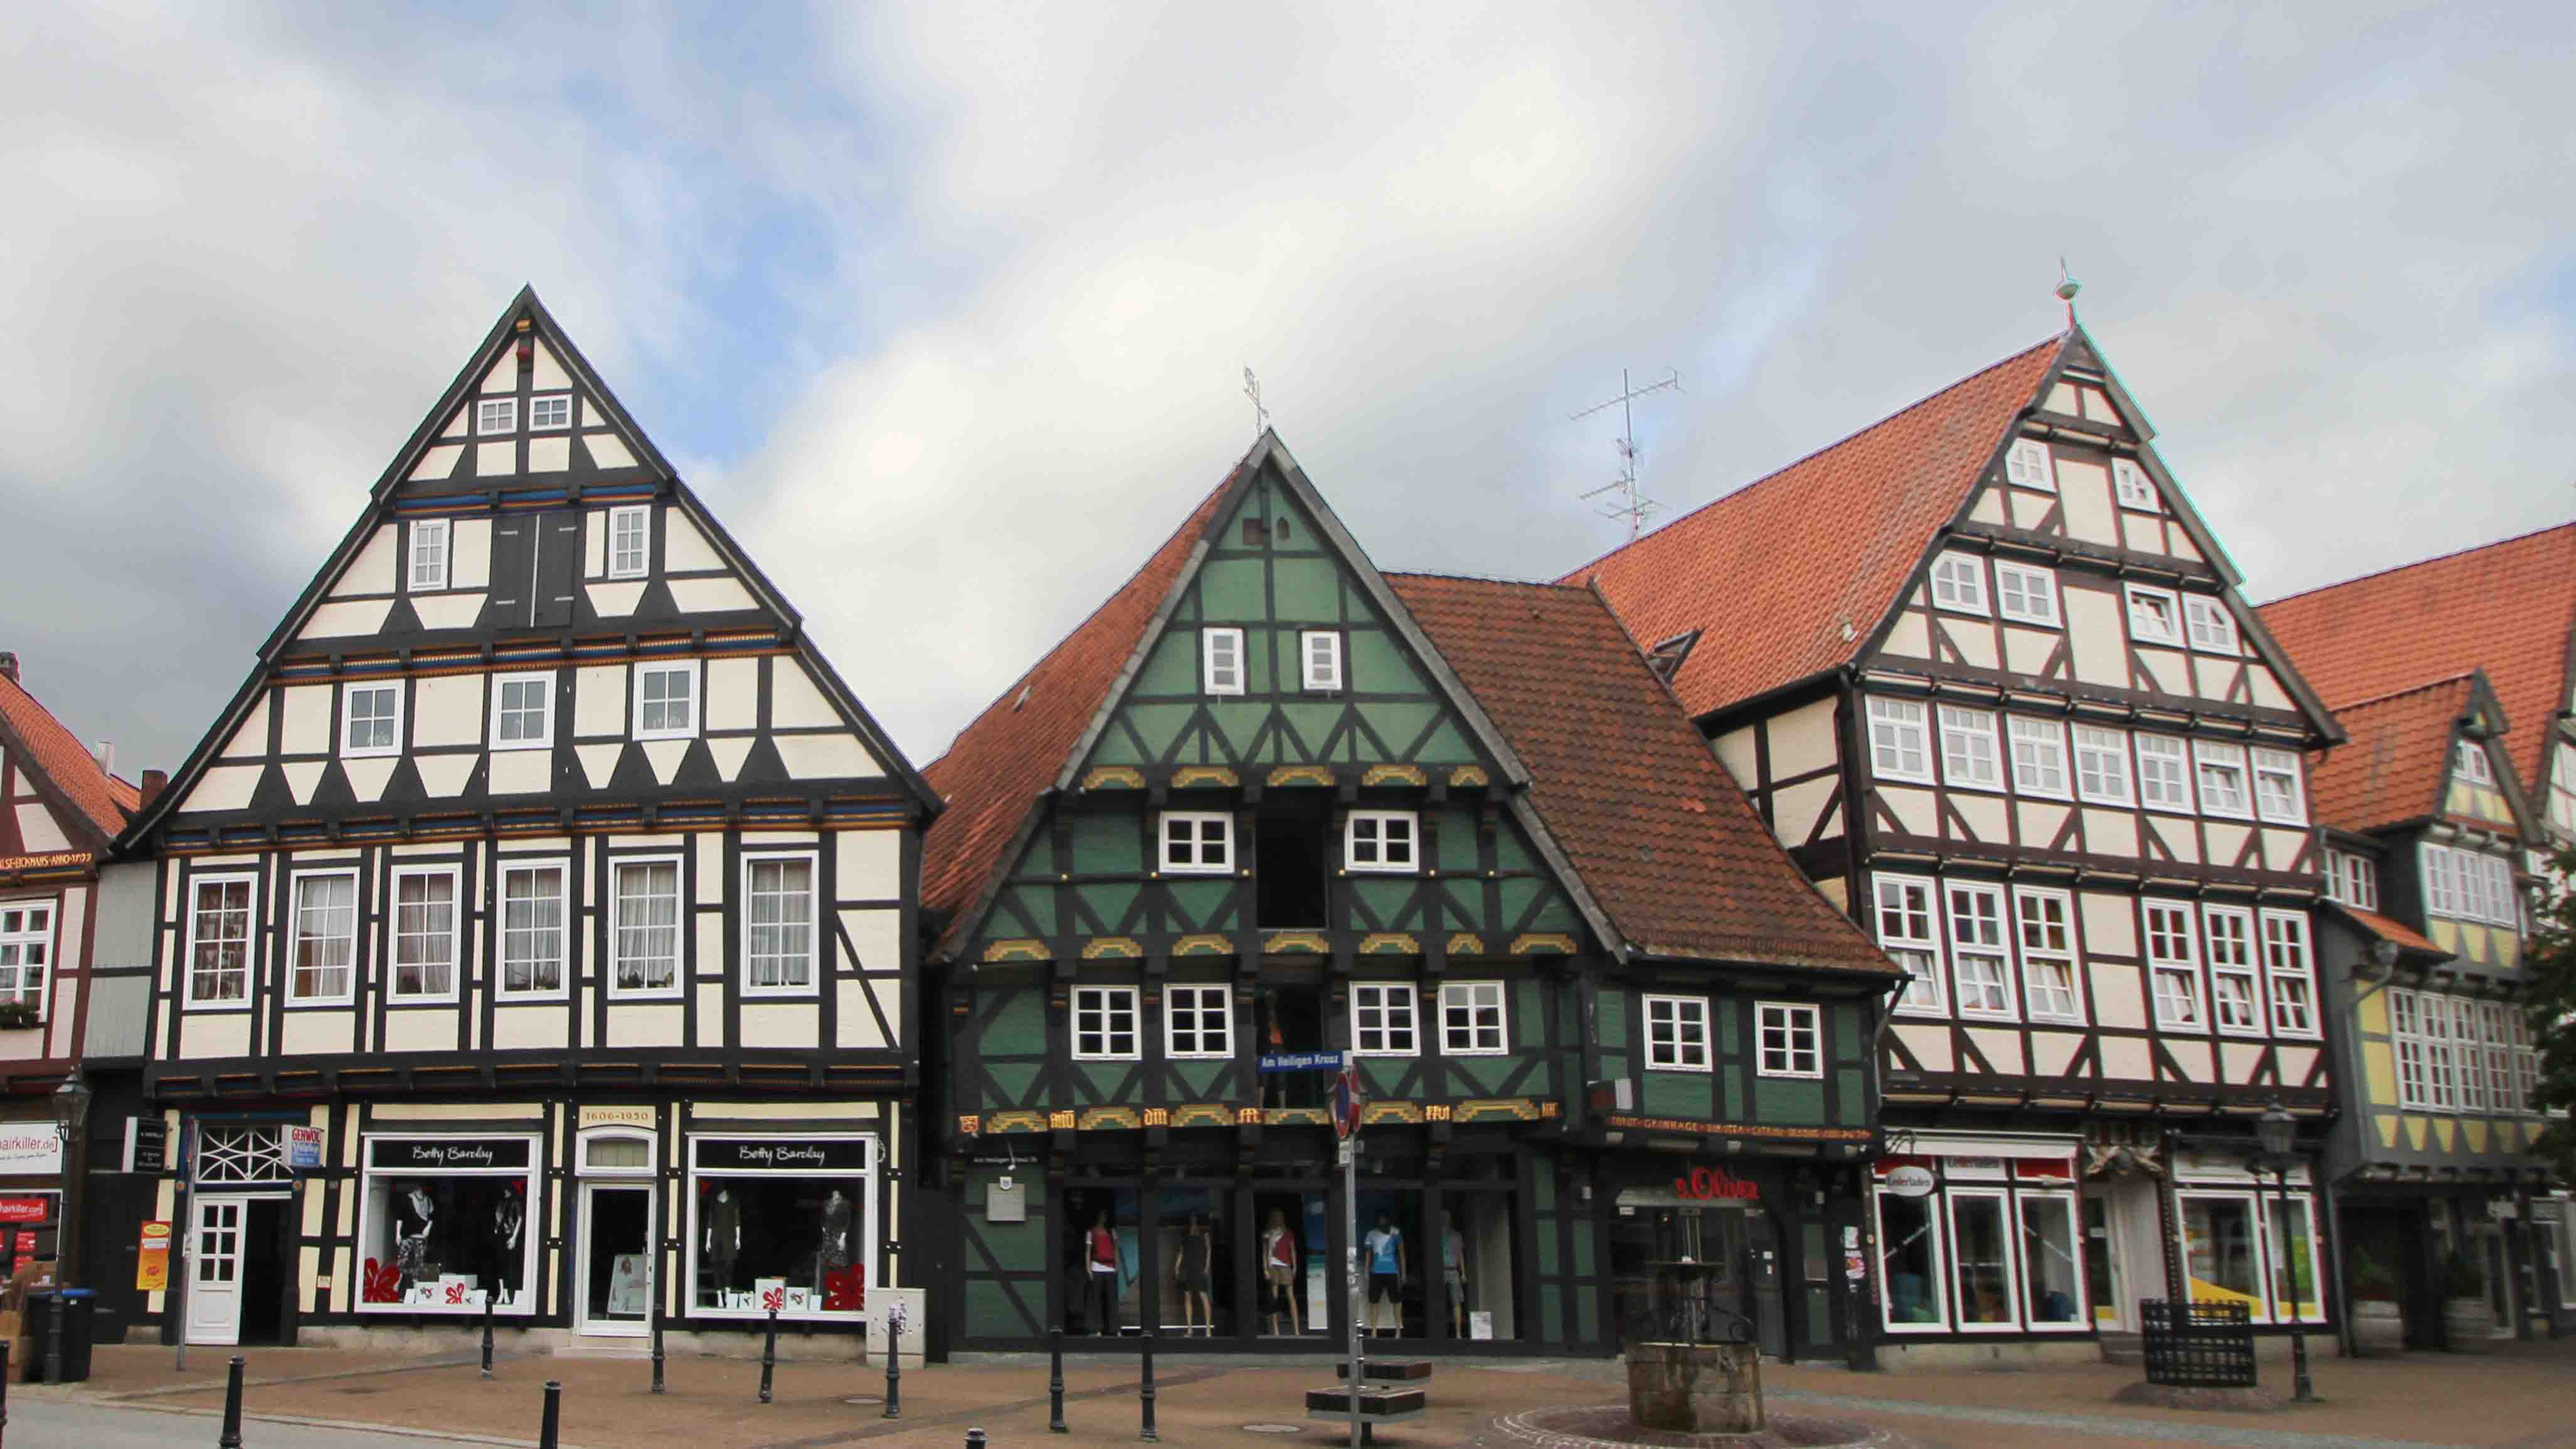 Oldest dated house in Celle